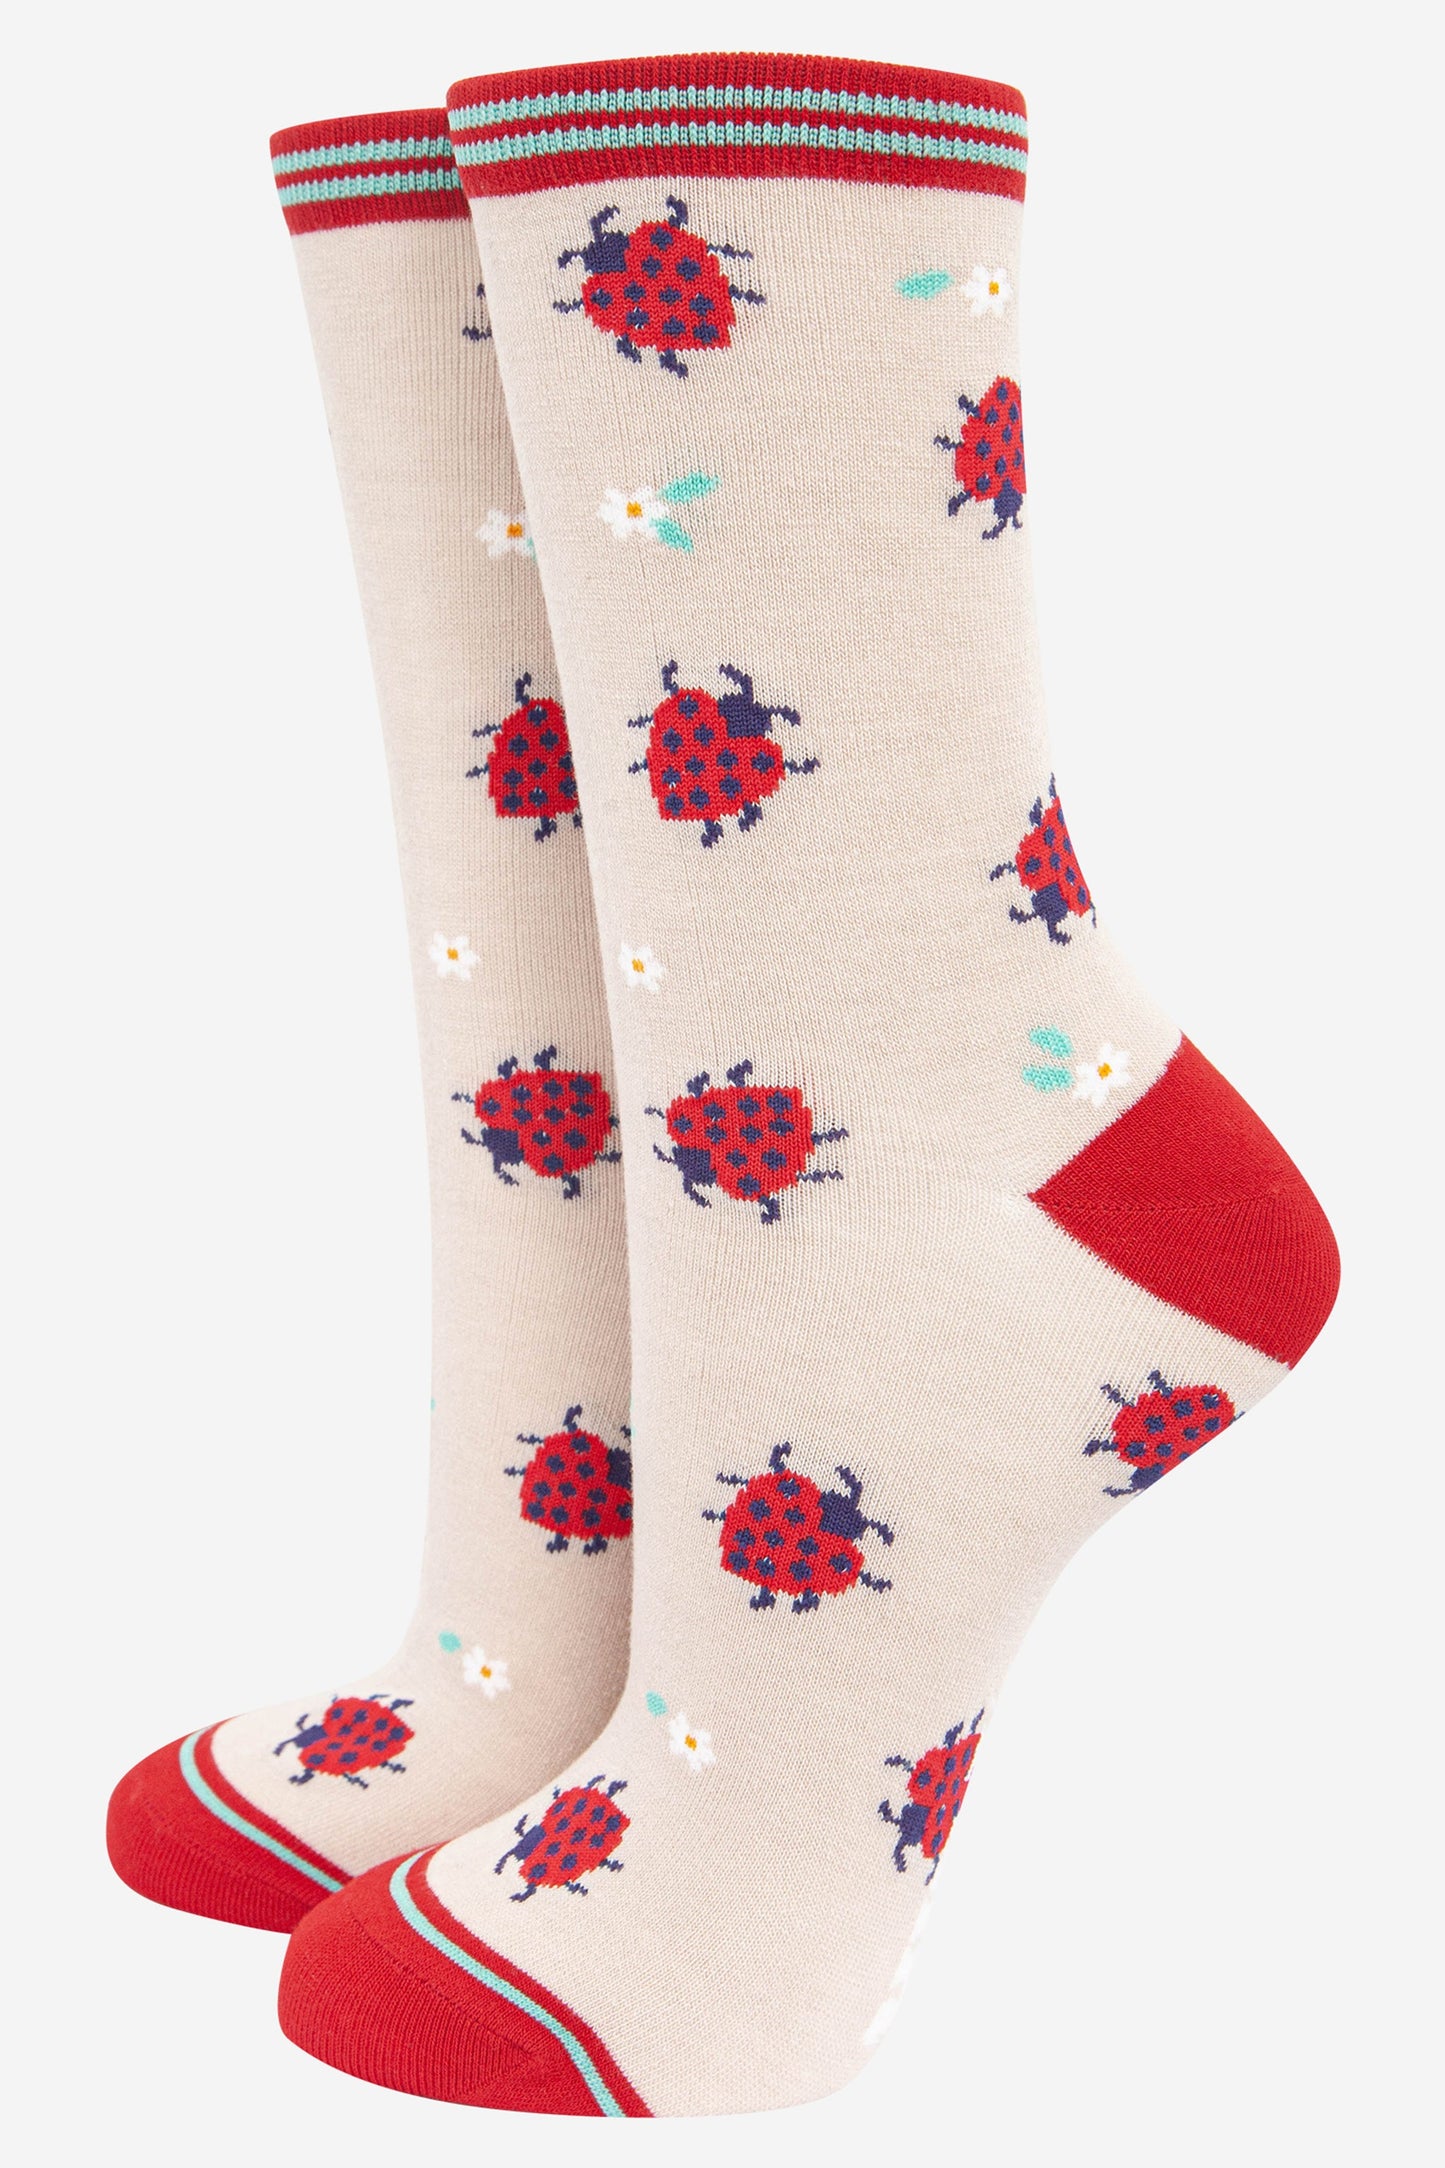 cream and red ankle socks featuring love heart shaped ladybirds and flowers